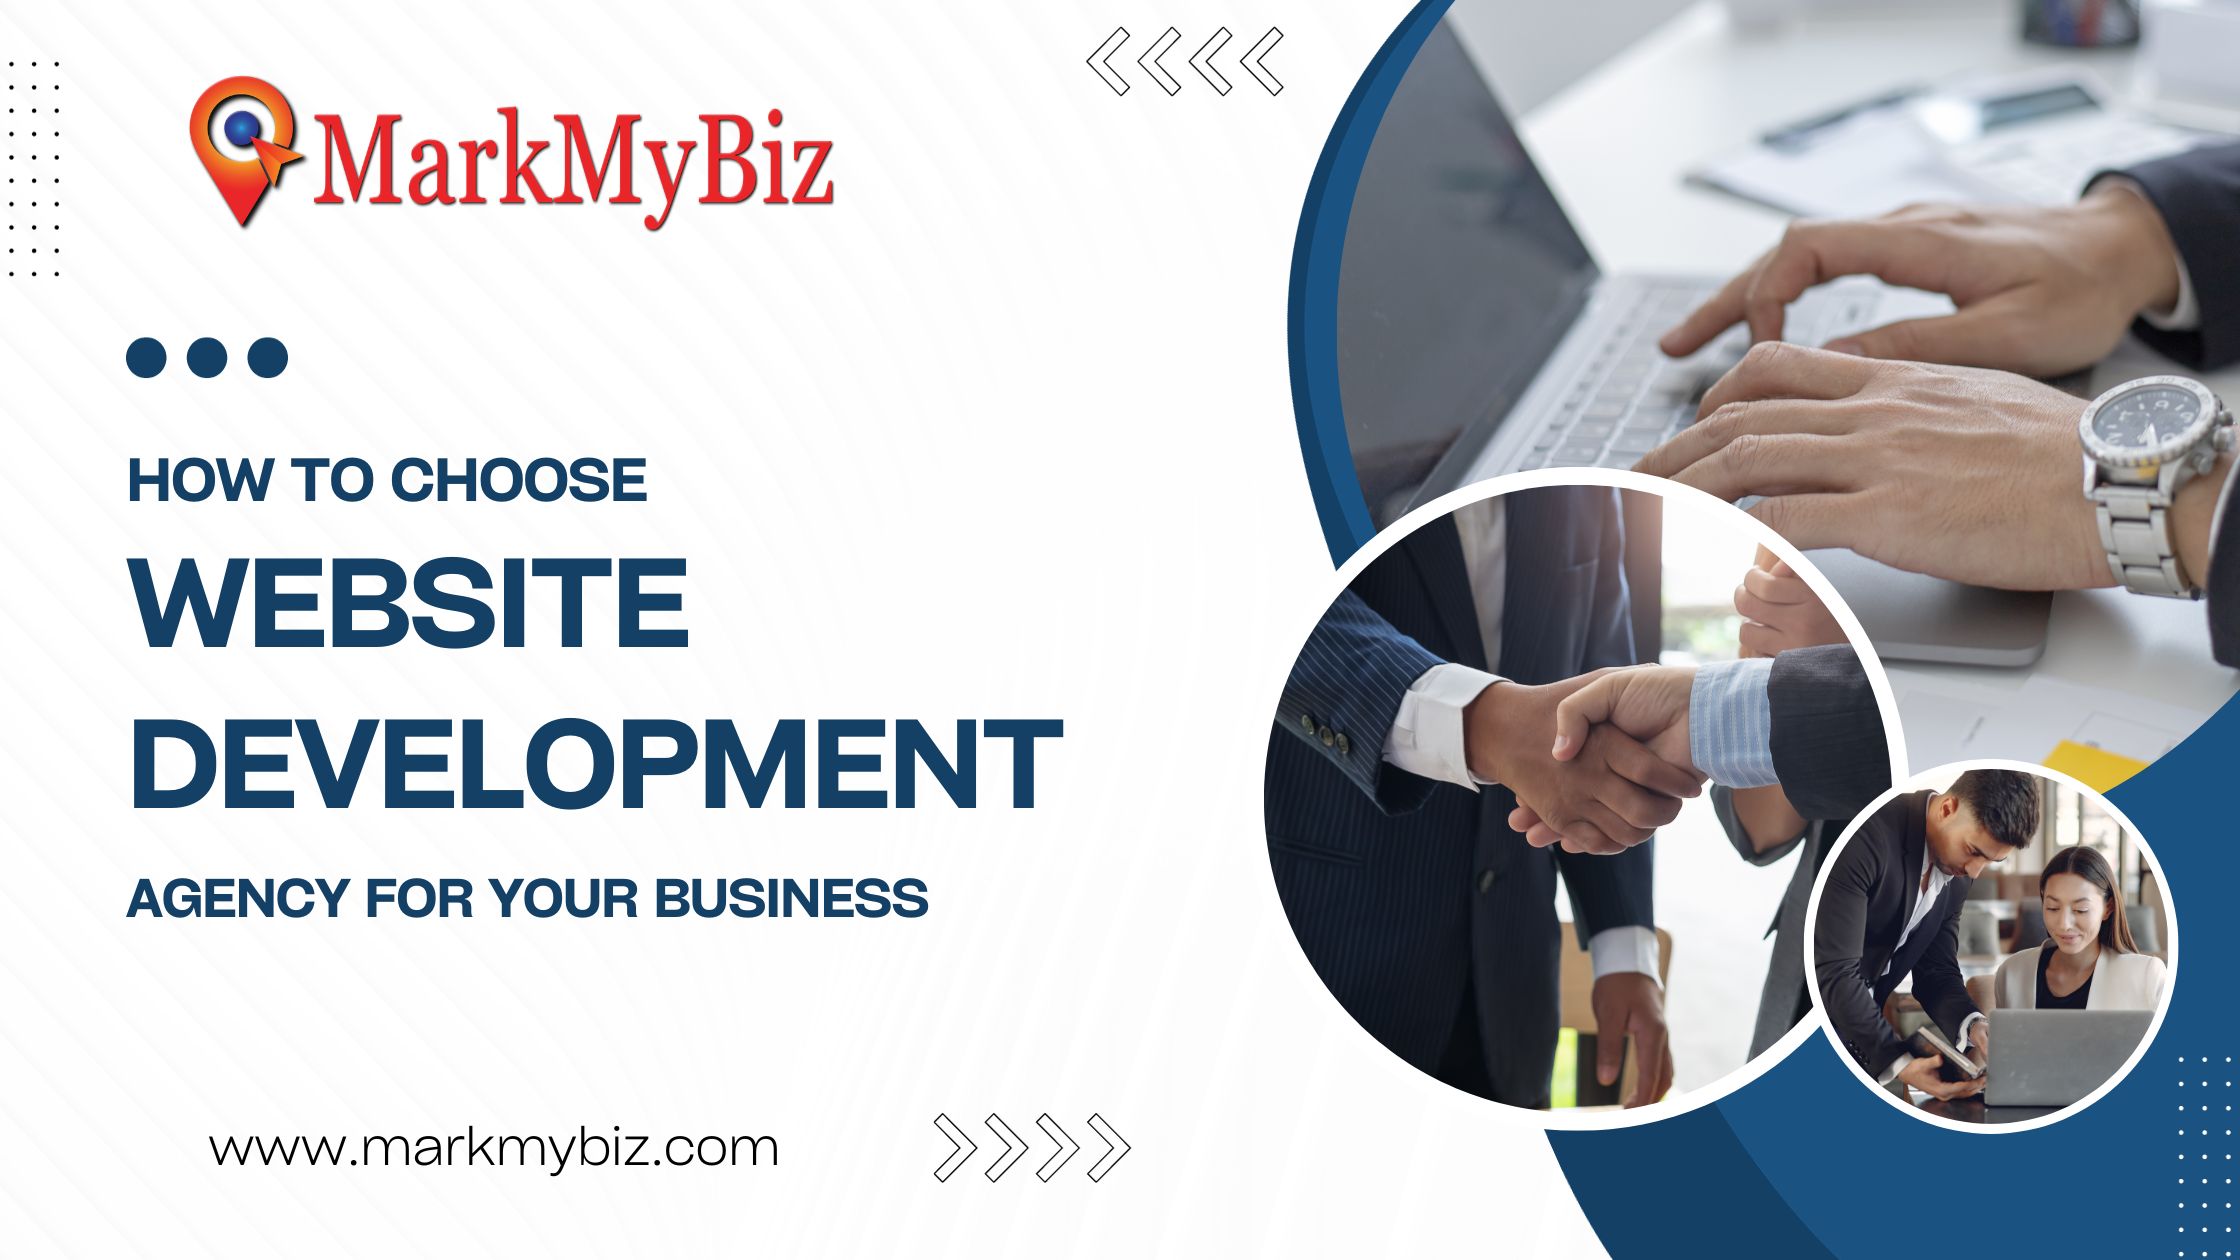 how to choose website development agency for your business